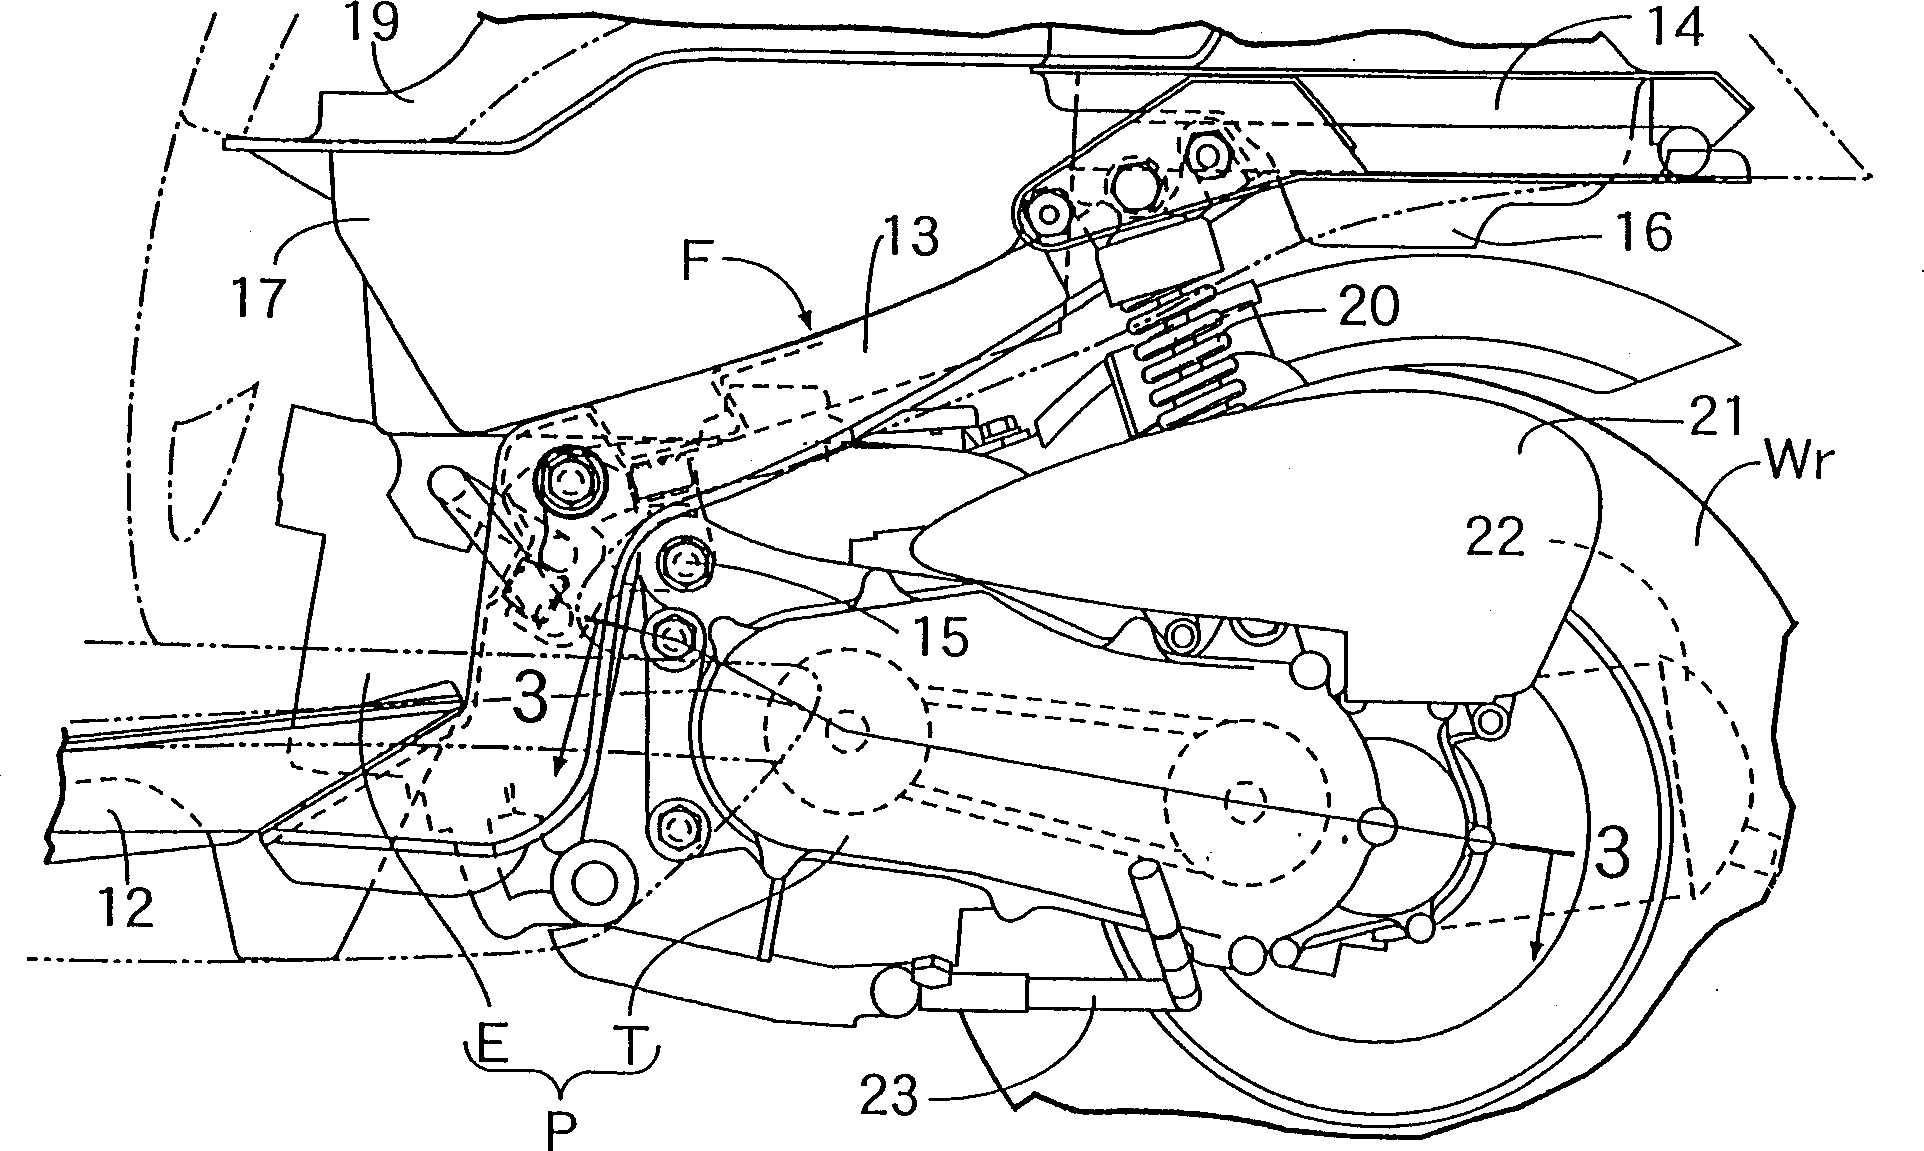 Radiator mounting structure in vehicles